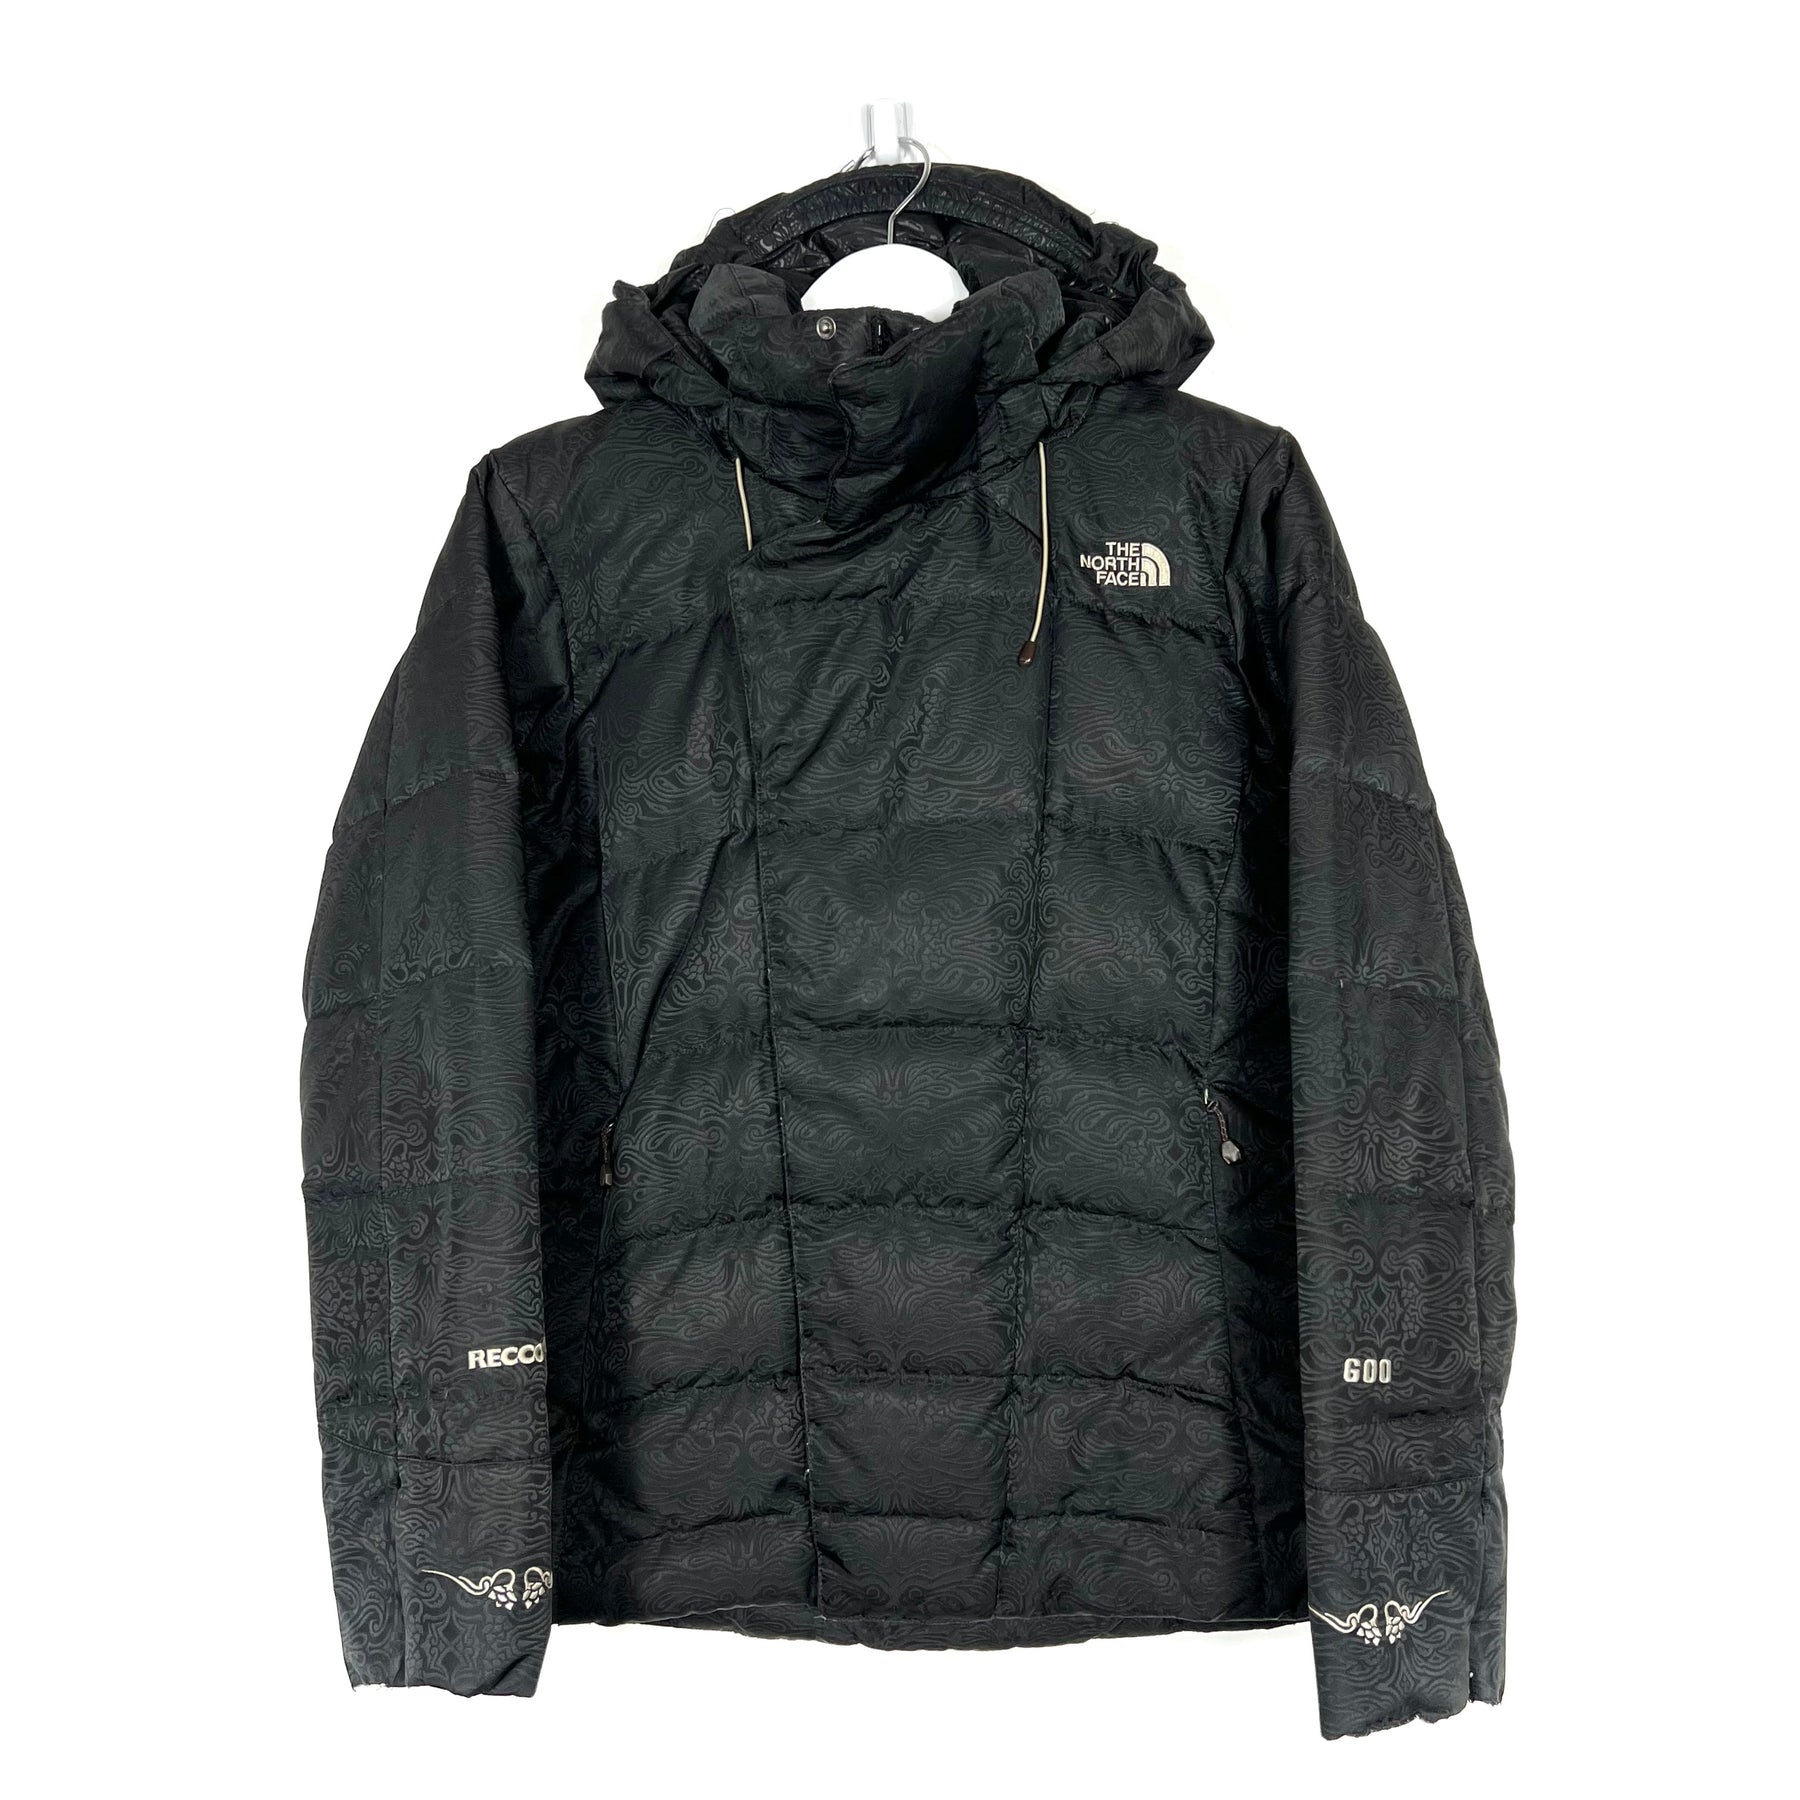 The North Face 600 Series Puffer Jacket - Women's Small